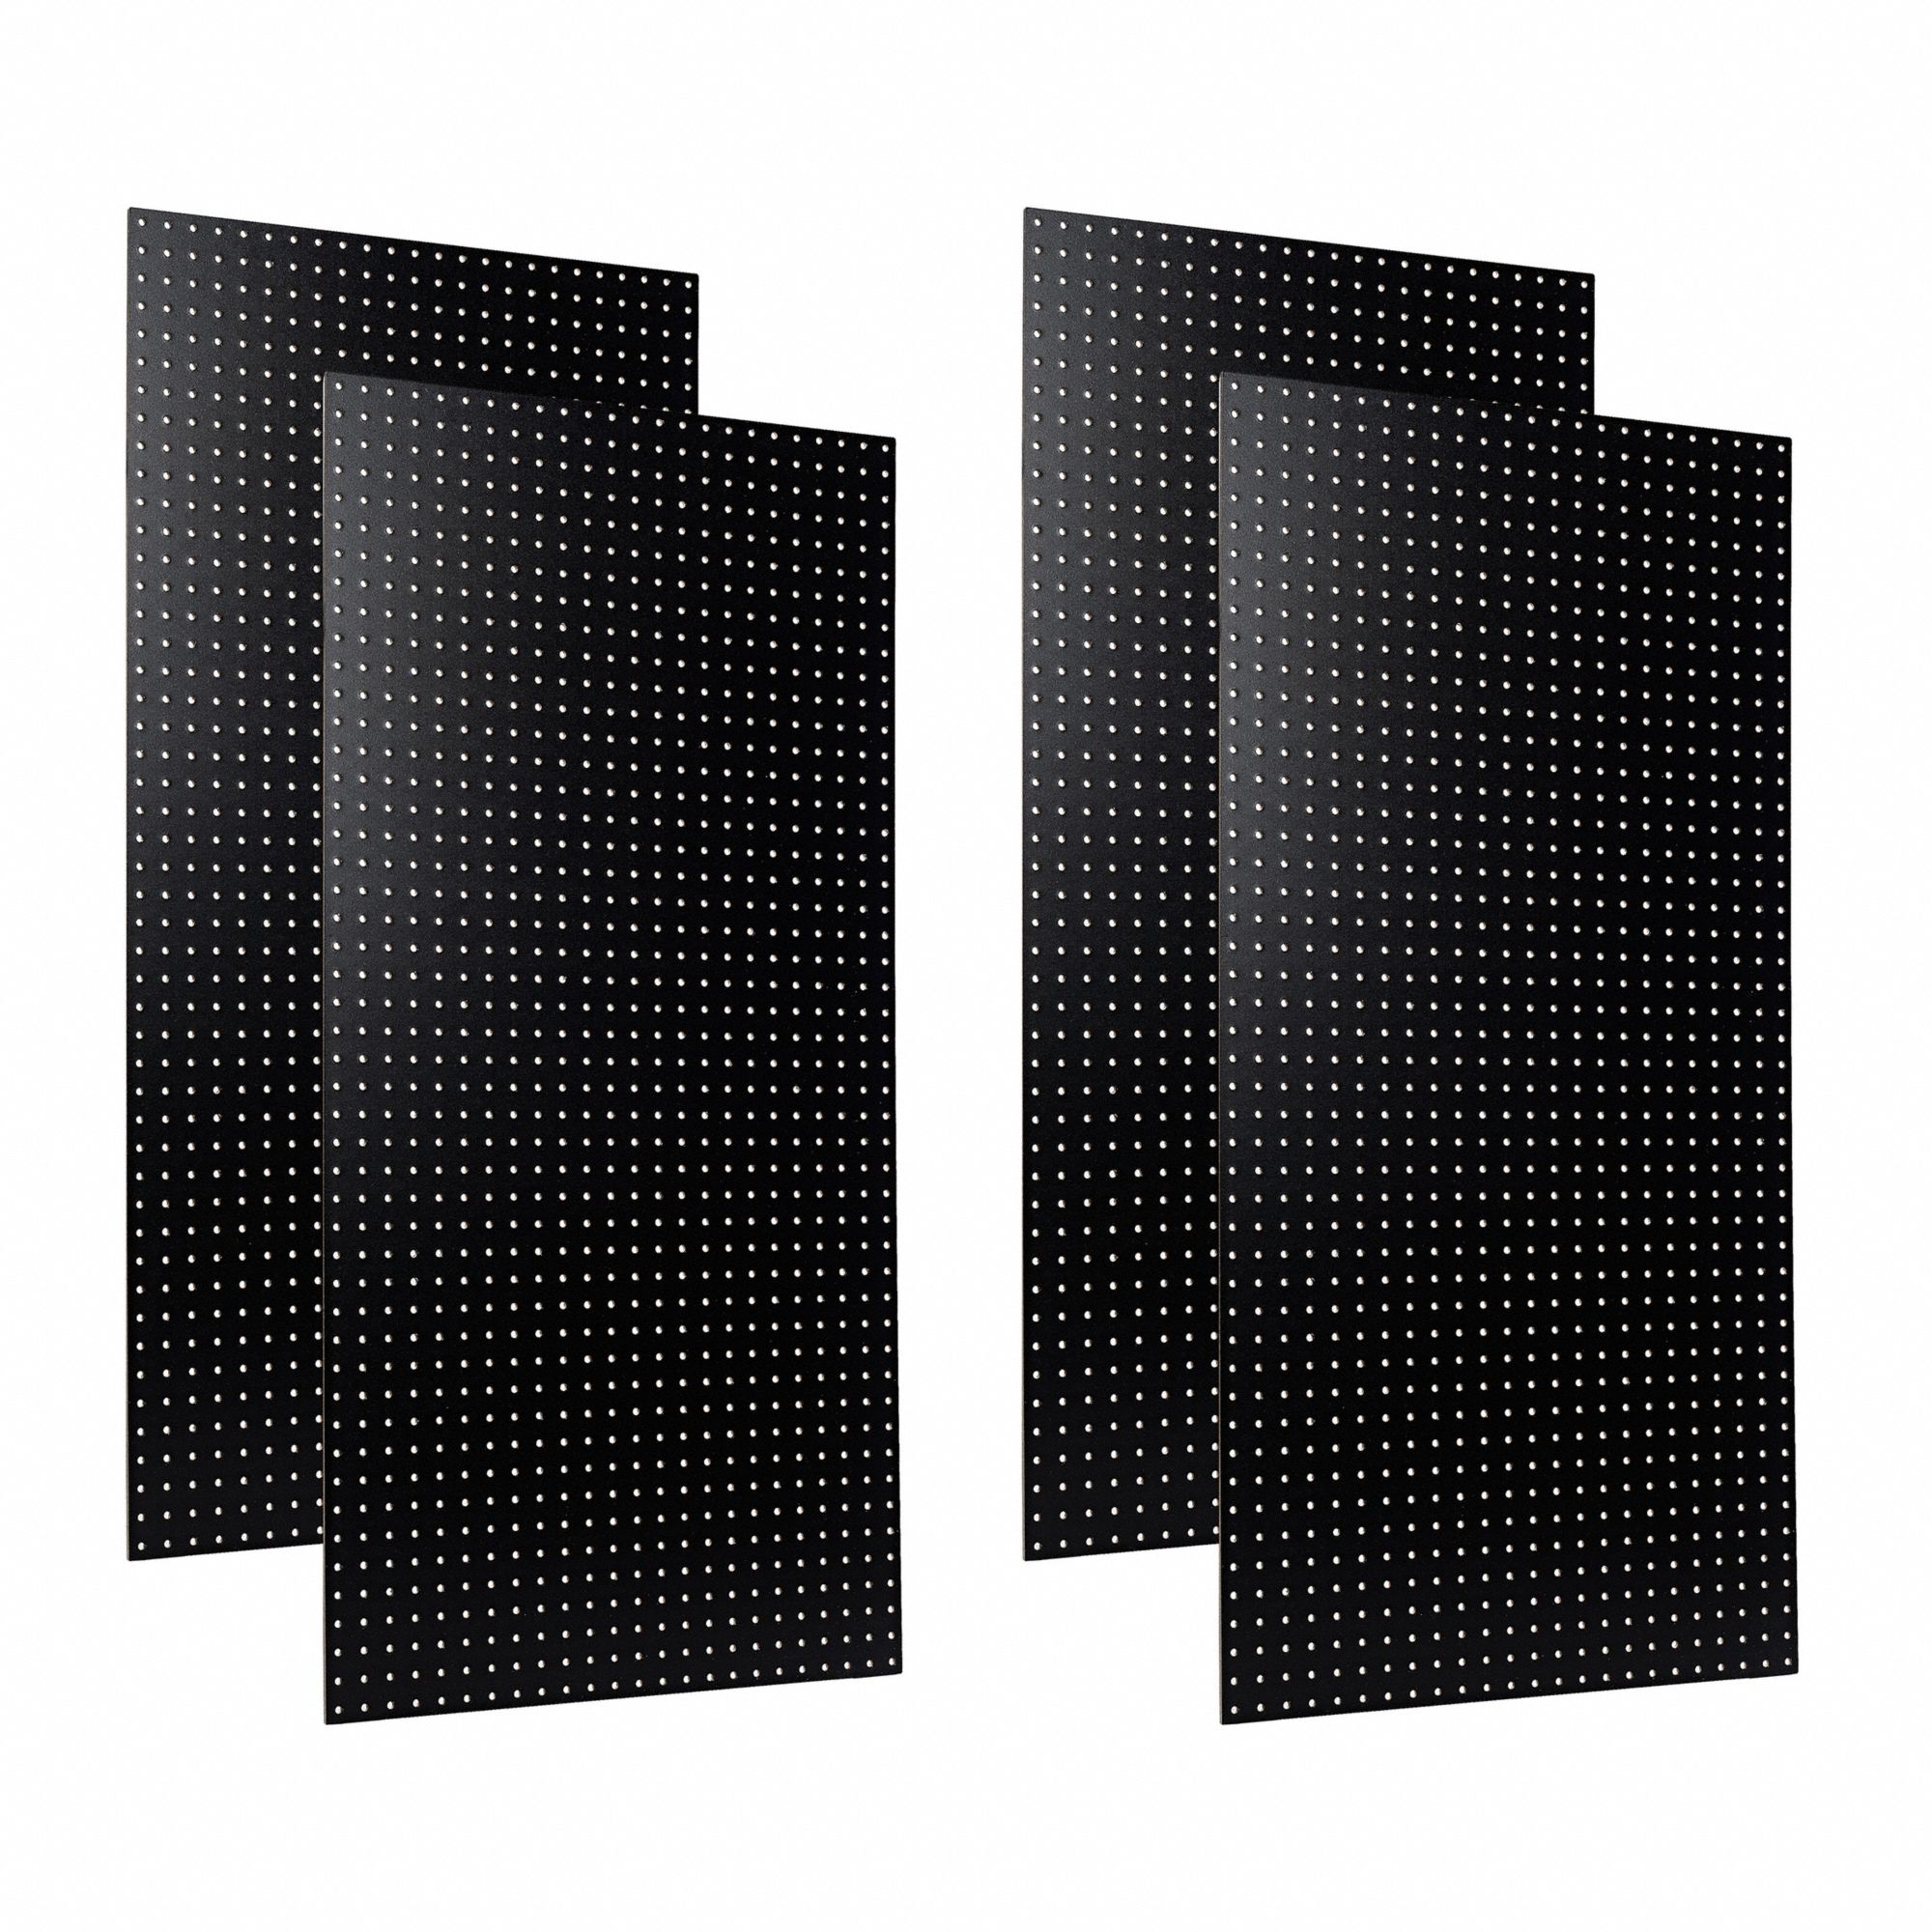 Pegboard Panel: Round, 1/4 in Peg Hole Size, 48 in x 24 in x 1/8 in, Black